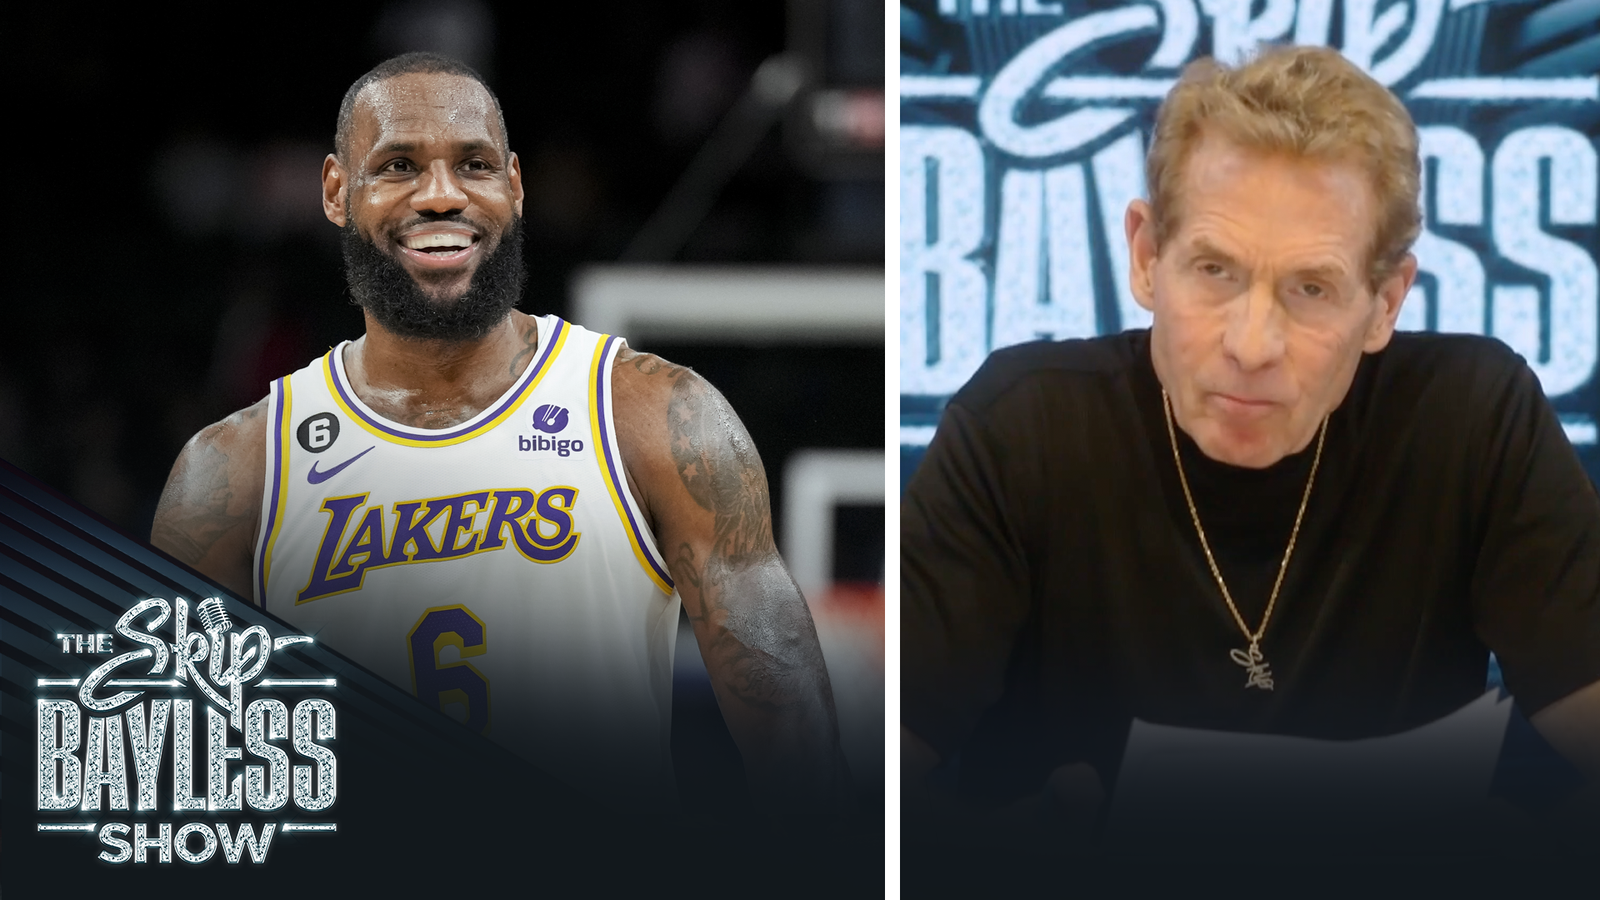 Skip says LeBron's recent scoring streak is "impossible, all time great"